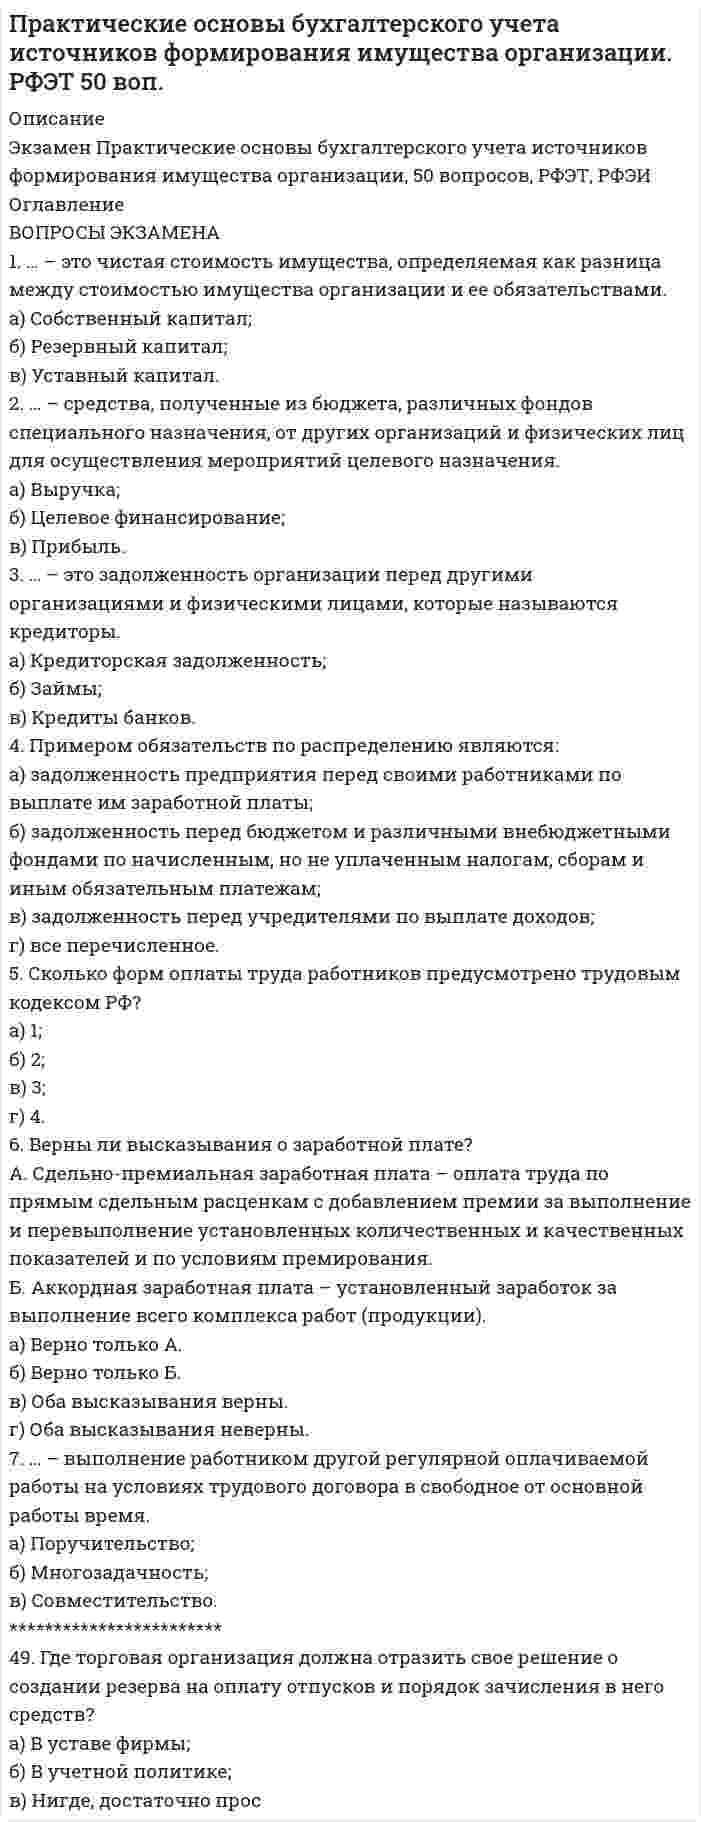     
          Описание
          Задание 2 TYPES OF BUSINESS ENTITYFeatures of sole traders and partnershipsA sole trader is exactly what it sounds- one person managing their own business. This person can employ as many workers as he wishes but does not share the finance, control, decision-making or profit with anyone else. This form of legal organization has unlimited liability. This means that there is no limit to the business debts for which the owner is responsible.Responsibility extends to the possibility of having to sell private possessions to pay off the business debts. This form of organization is only simple for small, simple businesses with few employees and little capital.A partnership is a way of sharing with others the managerial and financial responsibility for a business. Legally a partnership must consist of between 2 or 20 partners. Partnerships, like sole traders, usually have unlimited liability although limited partnerships are possible.2A partnership allows people to share capital and skills and expertise. More finance is available because all the partners can contribute. Although all the partners are responsible for the business’s debts, one partner is not liable for another’s private debts.Vocabulary Notessole trader - компания в индивидуальной собственностиunlimited liability - неограниченная ответственностьbusiness debt - долги компанииpartnership - товариществоmanagerial &amp;financial responsibility - административная и финансоваяответственность contribute - вноситьliable for private debts - ответственность за личные долгиQuestions to the text:1. What is the simplest form of business?2. Does the owner have sole managerial and financial control?3. Are profits shared?4. To what limit does the responsibility of a sole trade extend?5. What is a partnership?6. What is a legal requirement for the number of partners?7. Is unlimited liability of partners an advantage or disadvantage ofa partnership?8. What is the main difference between a sole trader and a partnership? 9. How do sole traders and partnerships differ?Complete the text using the words:Bankruptcy, creditors, issue, liability, losses, partnership, file, sole trader, financial, premises, capital, corporationA. The simplest form of business is the individual proprietorship or (1) .........: for example, a shop or a taxi owned by a single person. If several individuals wish to go into business together they can form a (2) .........; partners generally contribute equal capital, have equal authority in management and share profits or (3) ......... In many countries, lawyers, doctors and accountants are not allowed to form companies, but only partnerships with unlimited (4) ......... for debts. But a partnership is not a legal entity separate from its owners; like sole traders, partners have unlimited liability: in case of (5) ........., a partner with a personal fortune can lose it all.Consequently, the majority of businesses are limited companies (US=(6) .........), in which investors are liable for the amount оf capital they have invested. If a limited company goes bankrupt, its assets are sold (liquidated) to pay the debts; if the assets do not cover the debts, they remain unpaid (i.e. (7) ......... do not get their money back.)B. Founders of companies have to write a Memorandum of Association (in the US, a Certificate of Incorporation), which states the company’s name, purpose, registered office or premises and authorized share (8) ......... (9) ......... (always with an ’s’ at the end)- is the technical term for the place in which a company does its business: an office, a shop, a workshop a factory , a warehouse, etc.Authorized share capital means maximum amount, a particular type of share the company can (10) ......... Founders can write Articles of Association (US=Bylaws), which set out rights and duties of directors and different classes of shareholders. Companies’ memoranda and articles of association, and annual (11) ......... statements are sent to the register of the companies, where they may beinspected by the public. (A company that (12) ......... its financial statements late is almost certainly in trouble).3Translate into English Using Passive Voice and Constructions with Non-Finite Forms of the Verb В денежных документах (например, приходных и расходных кассовых ордерах) исправления не допускаются.Документы, поступившие в бухгалтерию, обязательно проверяют: по форме, устанавливают необходимое количество заполненных реквизитов, наличие подписей, четкость заполнения документа. Затем проводится арифметическая проверка: определяют правильность подсчетов. Далее проверяют документ по существу: проверяют законность хозяйственной операции.  
            
            
            Представьте рисунки разных форм микробов. Обозначьте поверхностные, внутренние структурыПрофессиональный иностранный язык МЭБИК_Зачёт_Задание 2 Психологическая помощьПсихология (ответы к экзамену, РАНХ и ГС )Результат теста Технология и организация производства продукции и услуг УРГЭУРезультат теста философия УРГЭУРешение 30 задач на ГОСы, уголовное право (синергия)Ответы на экзамен Инструментальные средства информационных систем, Давыдова Е.В.Ответы по ВЭД с 1 по 28[ОТВЕТЫ] СИНЕРГИЯ. ГОСы. Задачи + Теория. Гражданско - правой профиль. 40.03.01 Юриспруденция.Ответы Теория информационных процессов и систем (Синергия)Периодизация новейшей истории (критерий, хронологические рамки периодов и этапов, ключевые тенденцииПрактическая часть госов гражданское право синергияПрактические задания по Теории государства и права